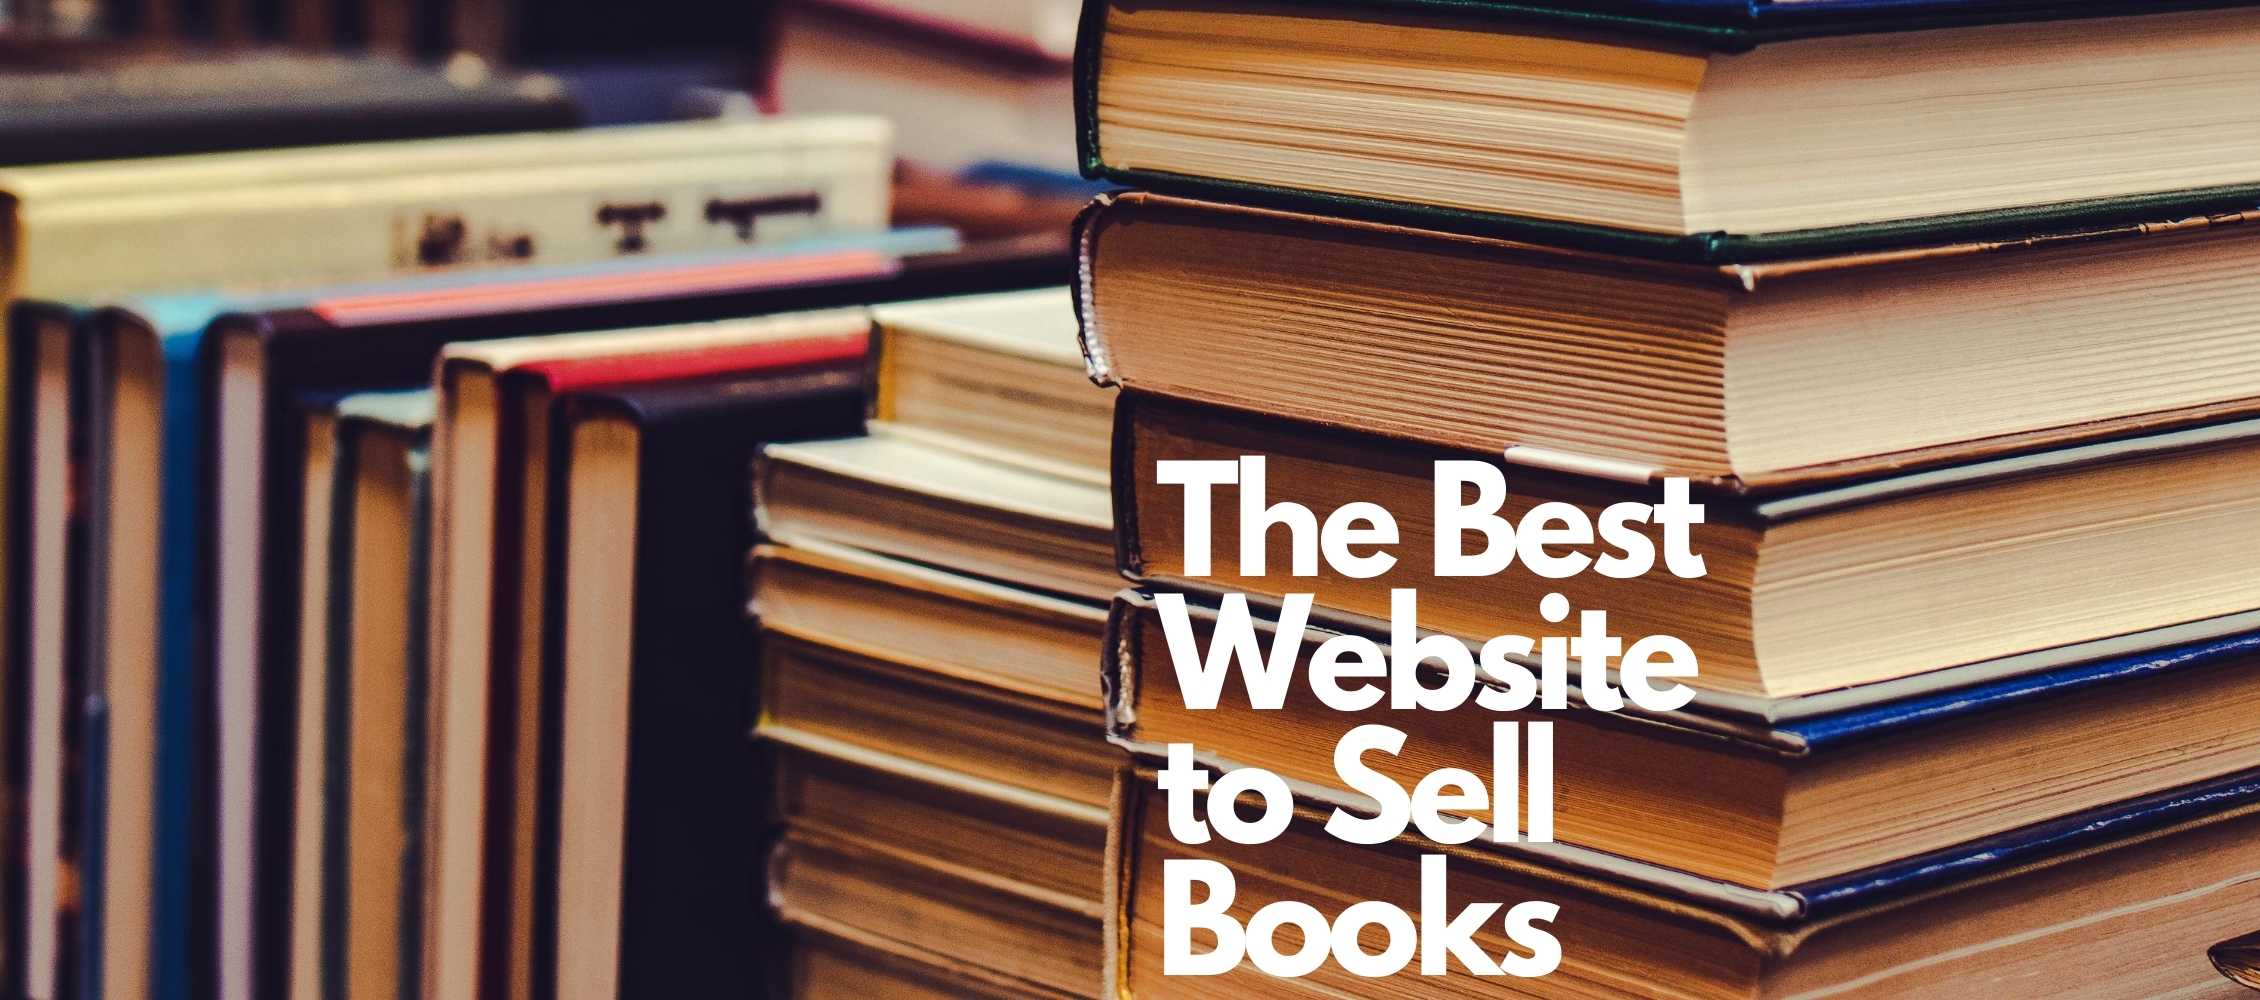 The Best Website to Sell Books A Complete List Sheepbuy Blog